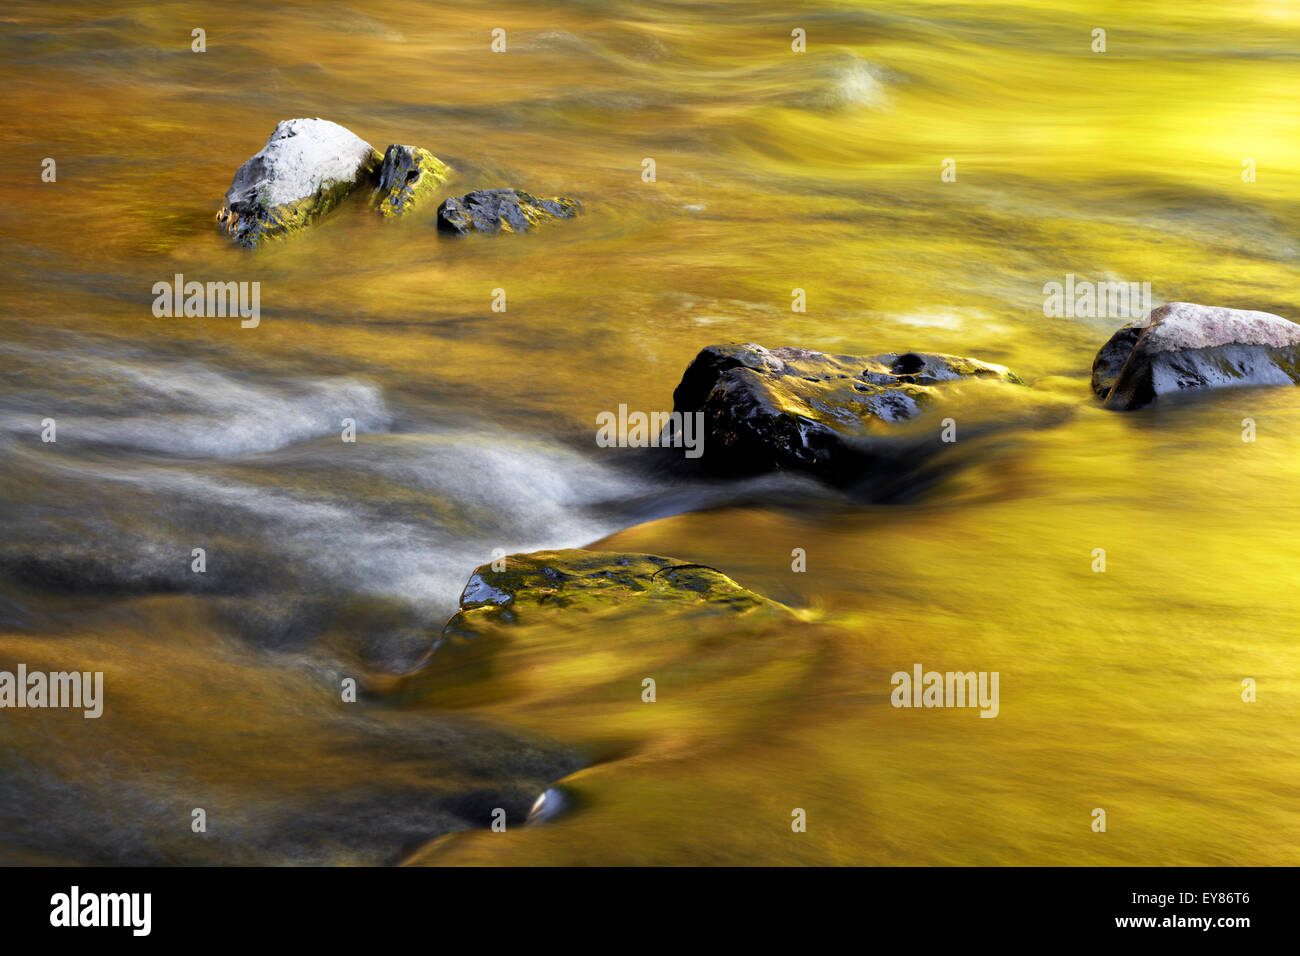 Stones in the riverbed, Wutachschlucht gorge, Black Forest, Baden-Württemberg, Germany Stock Photo